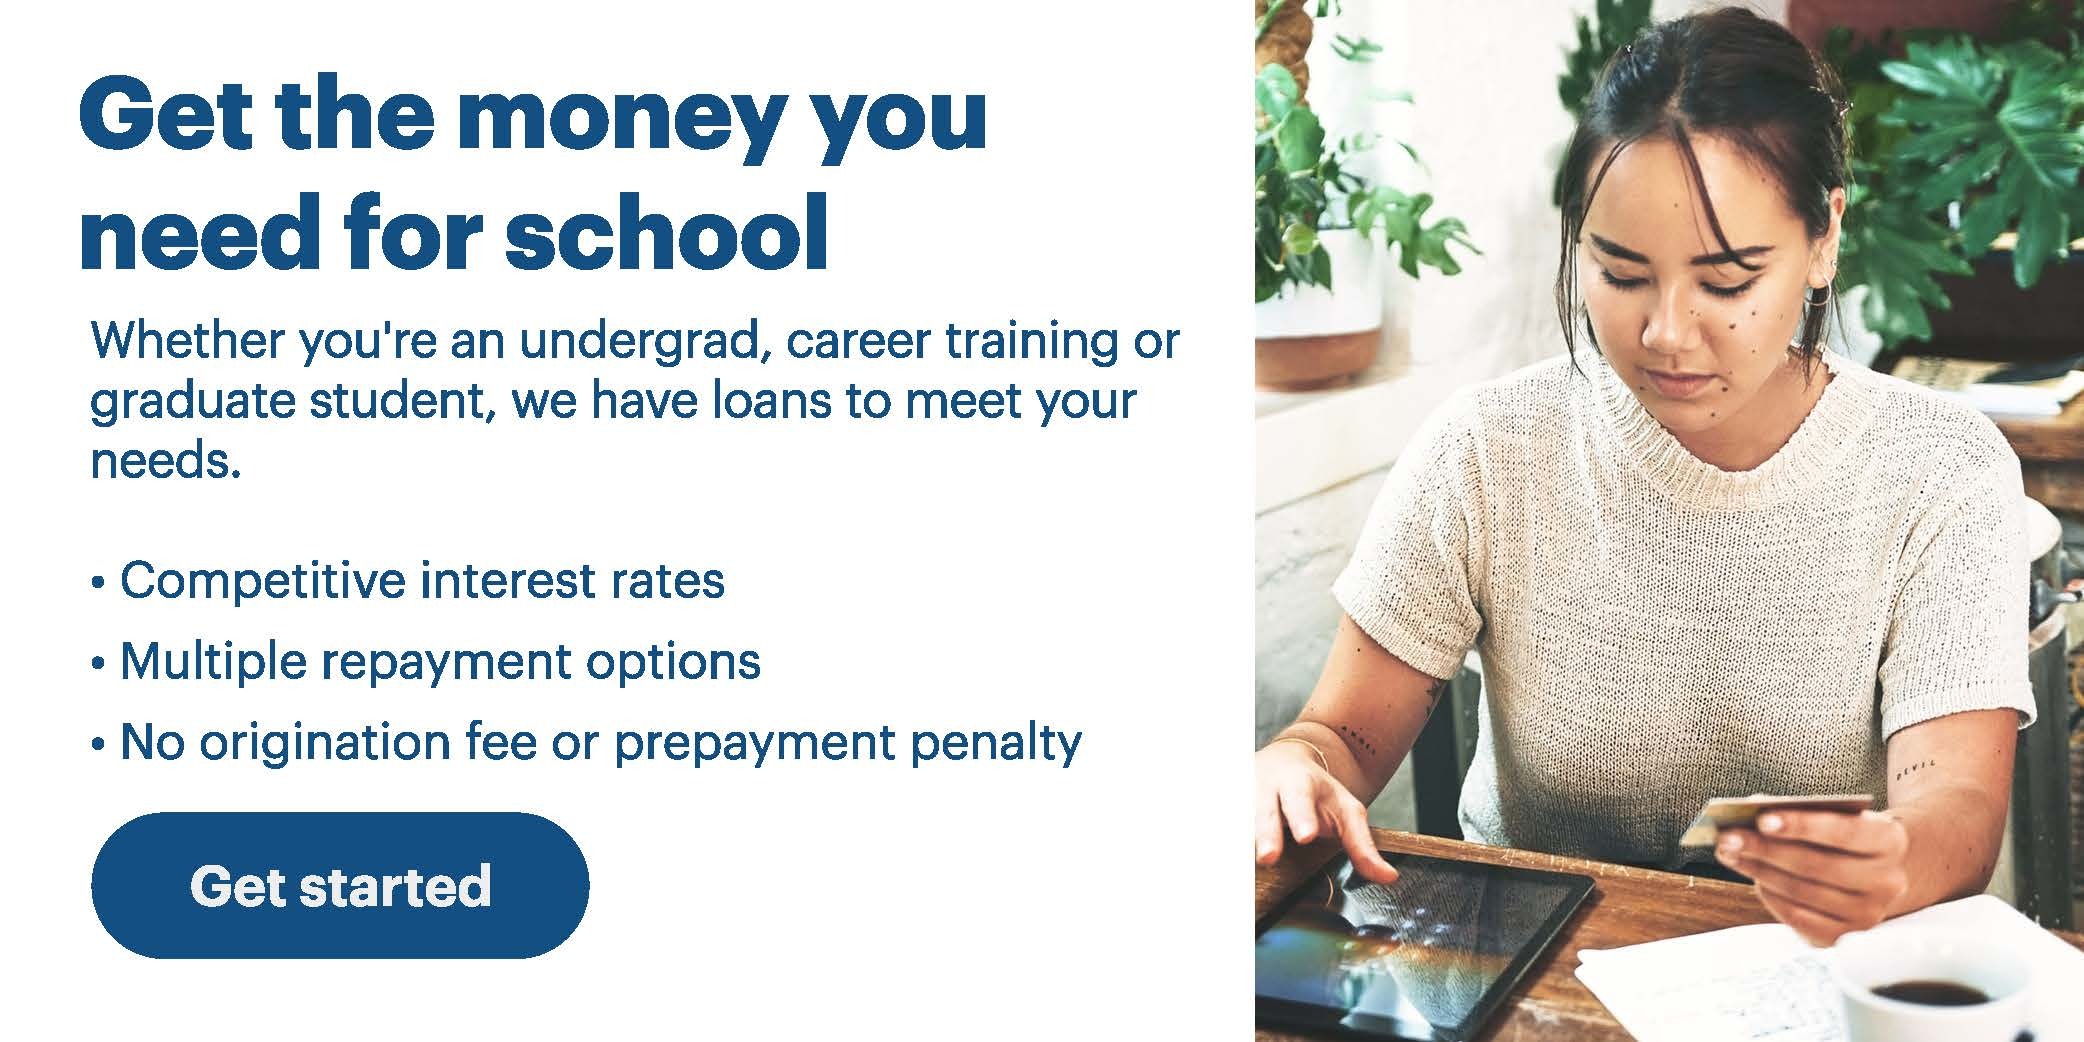 High-Tech Institute Private Student Loans by SallieMae for High-Tech Institute Students in Phoenix, AZ